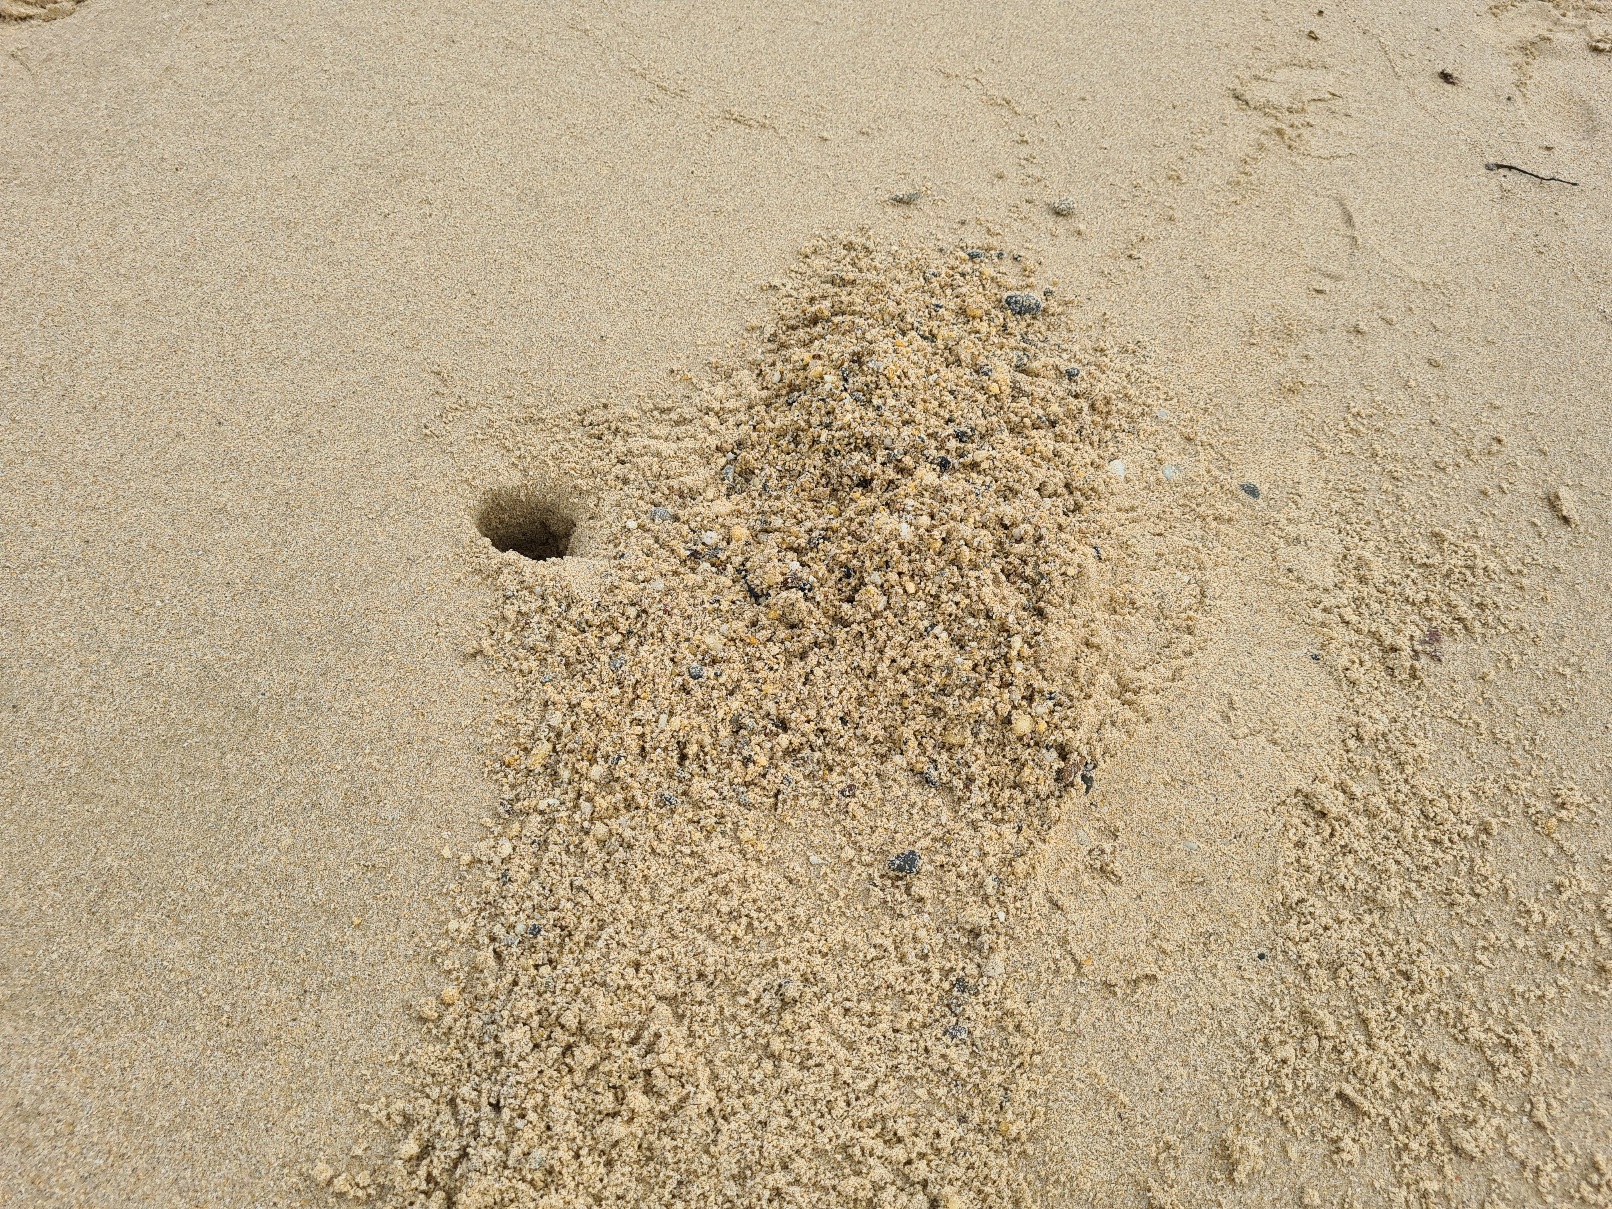 Crab holes in the sand